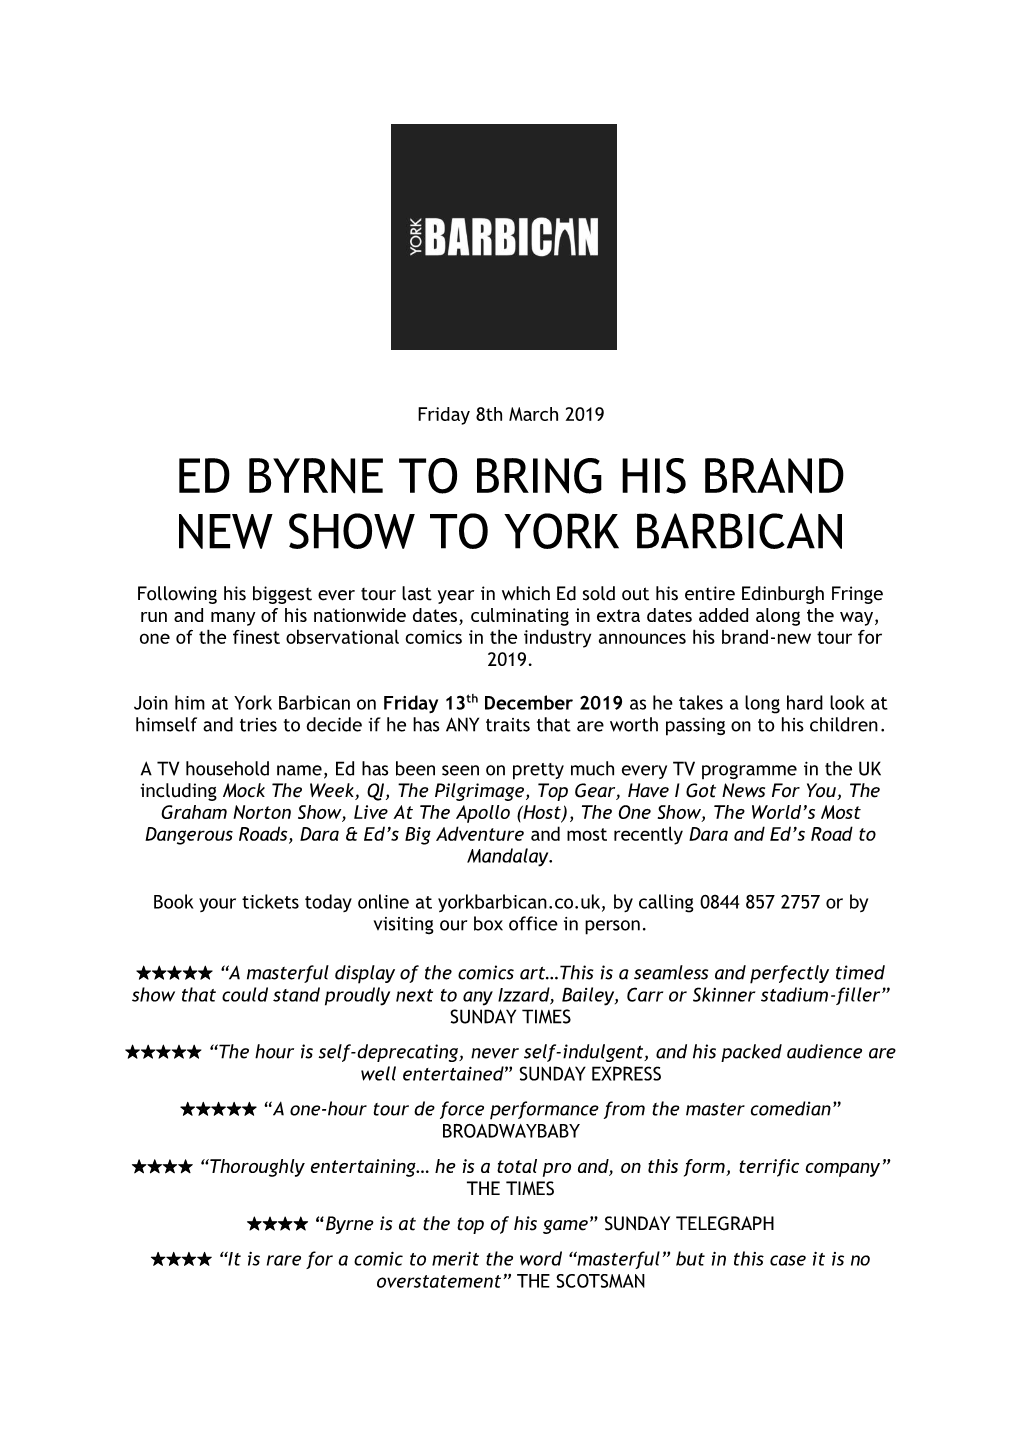 Ed Byrne to Bring His Brand New Show to York Barbican